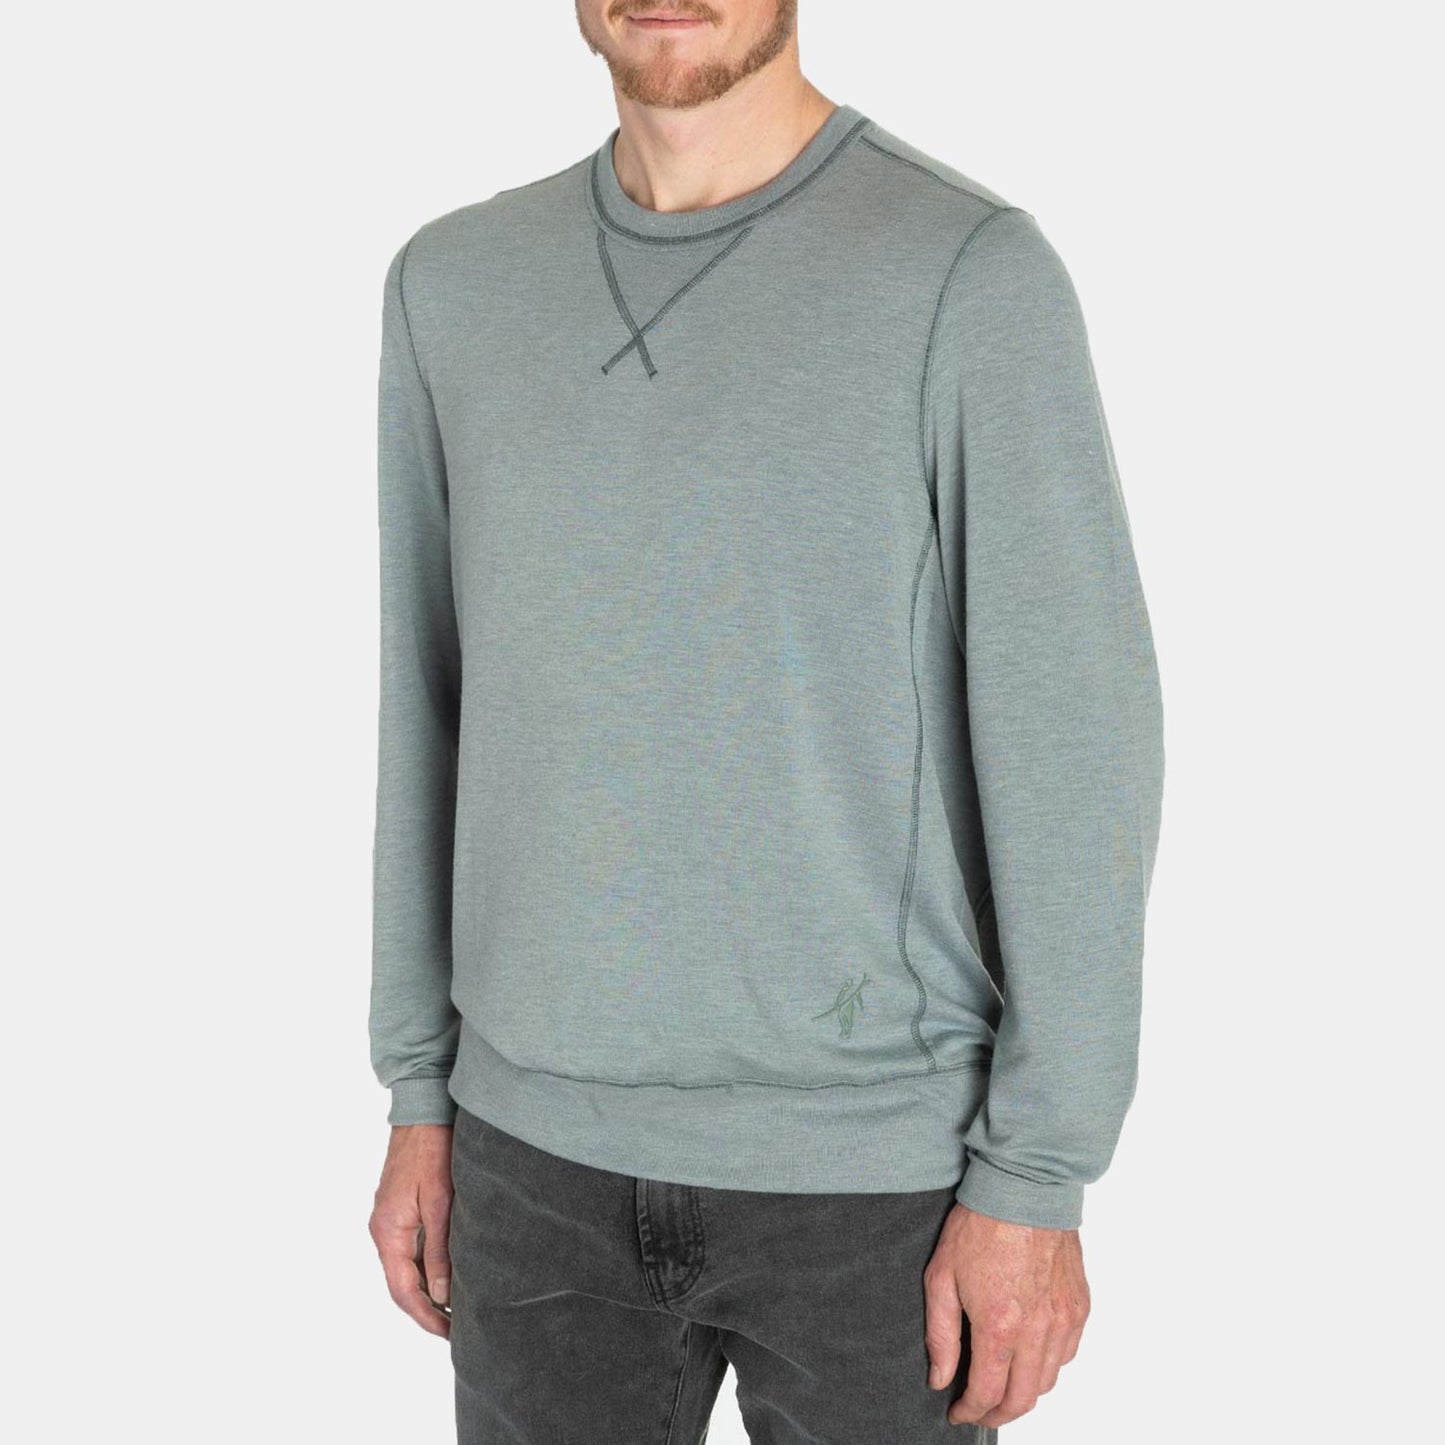 Toes on the Nose Super Soft L/S Crew in Seafoam Green